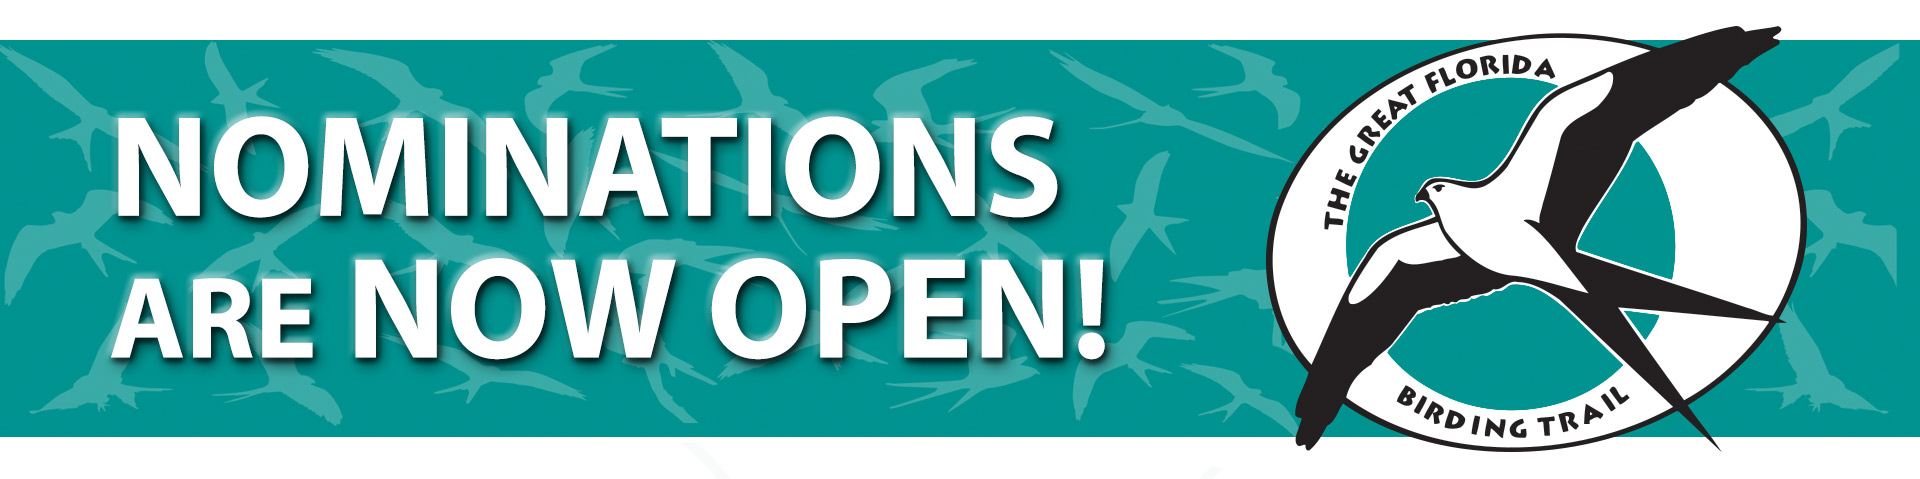 Banner announcing that nominations are open for new Great Florida Birding and Wildlife Trail Sites